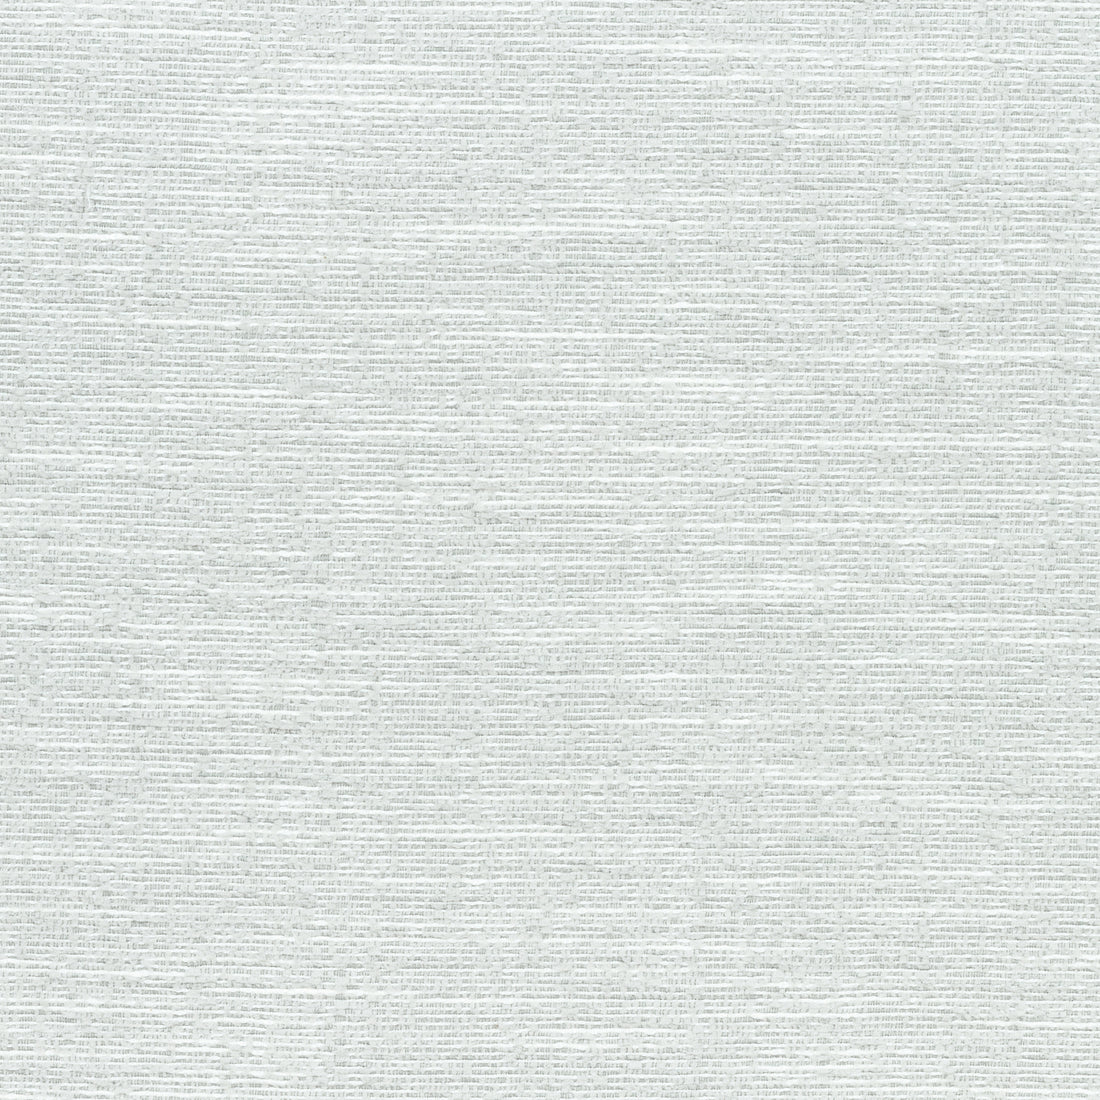 Freeport fabric in sterling color - pattern number W74615 - by Thibaut in the Festival collection